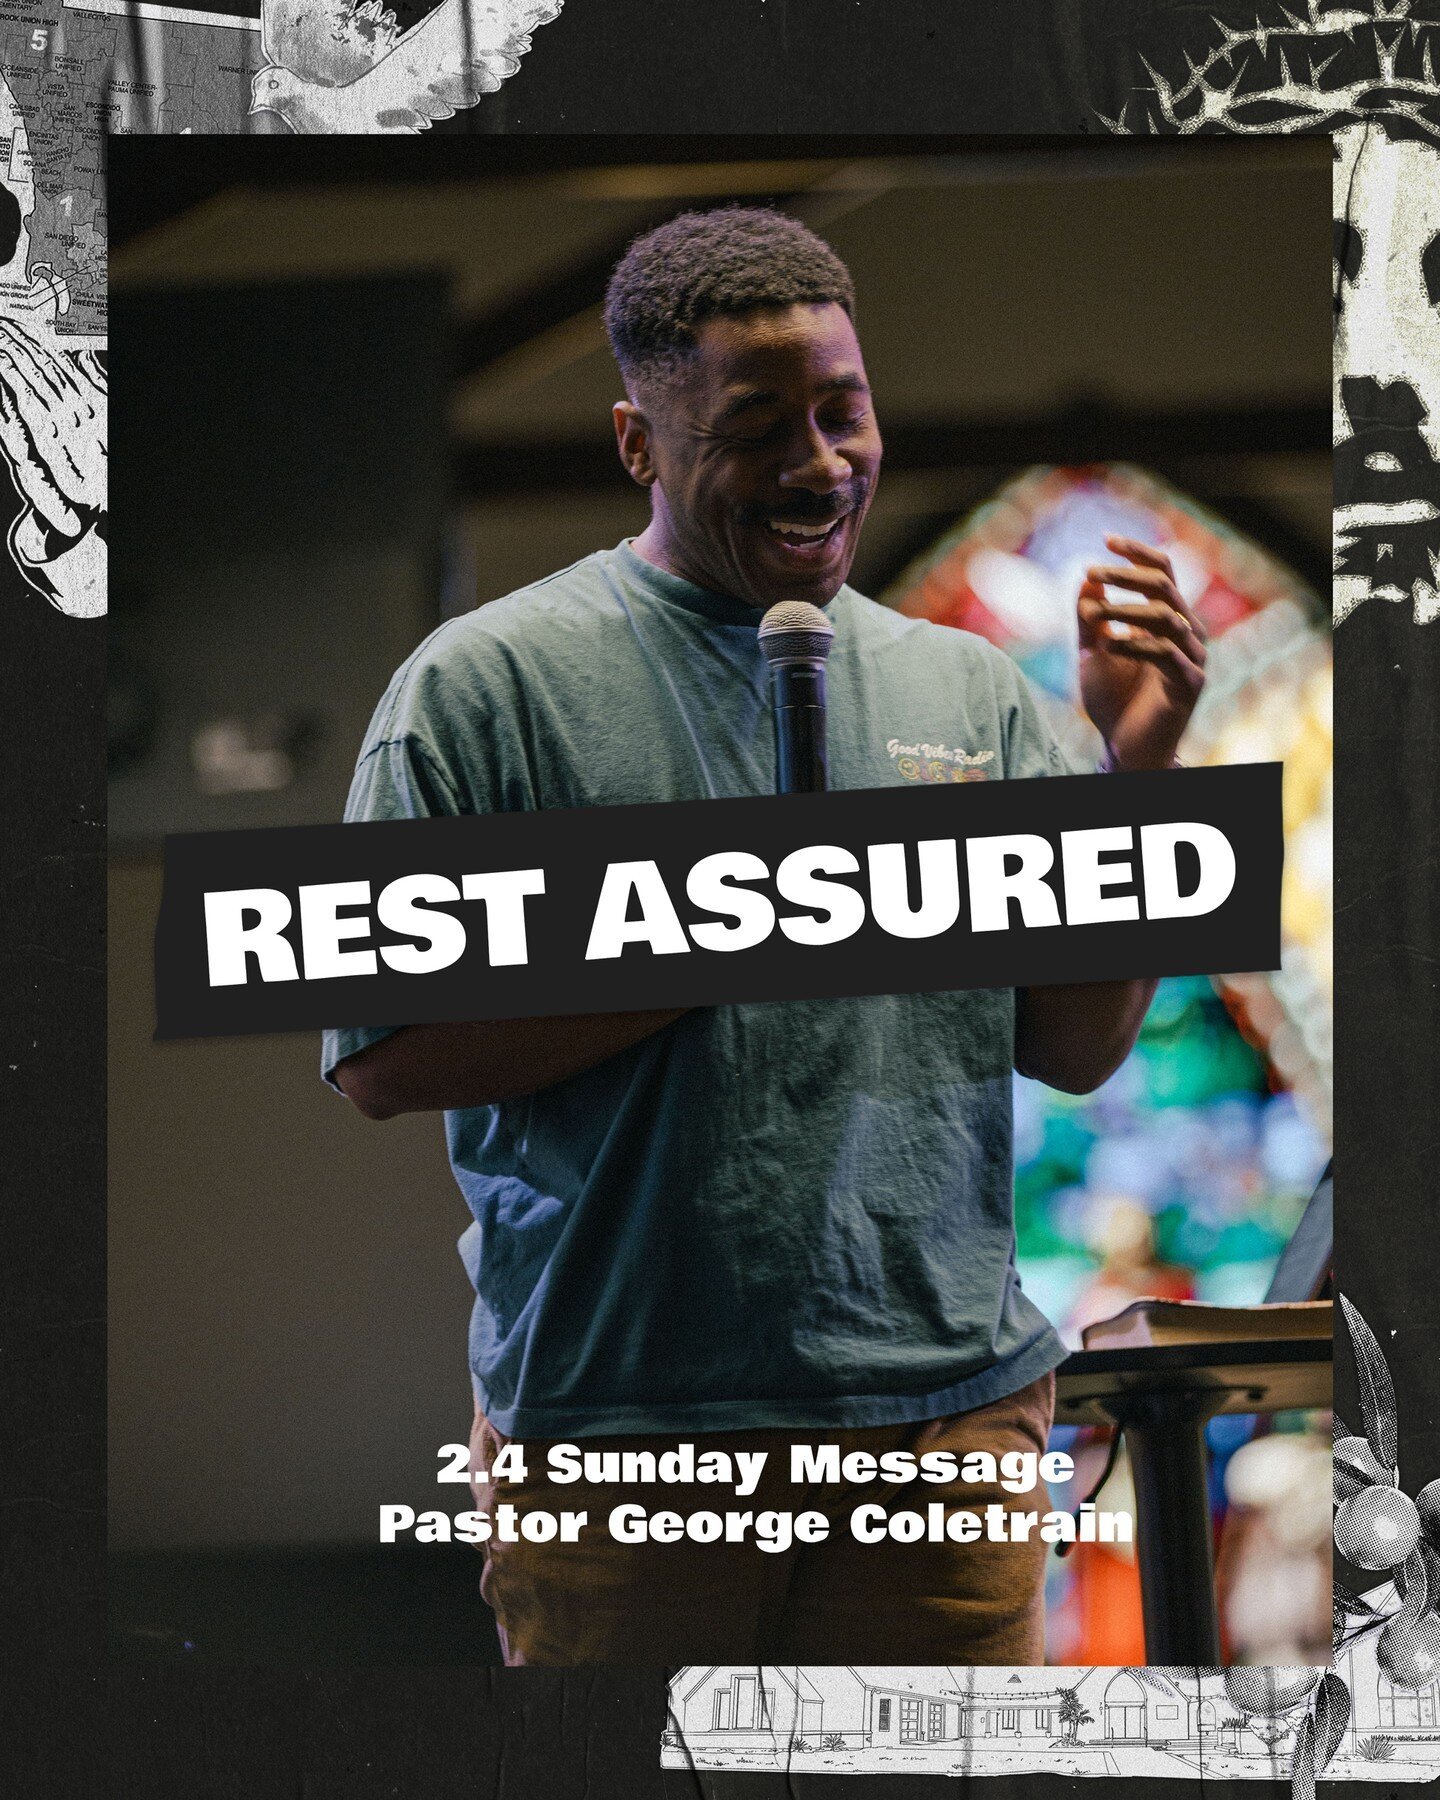 Sunday, 2.4 recap! Yesterday we had an incredible time continuing our &quot;Grit and Grace&quot; series but this time with our Creative Pastor @georgecoletrain giving the great message titled &quot;Rest Assured&quot;. We were challenged with the ques